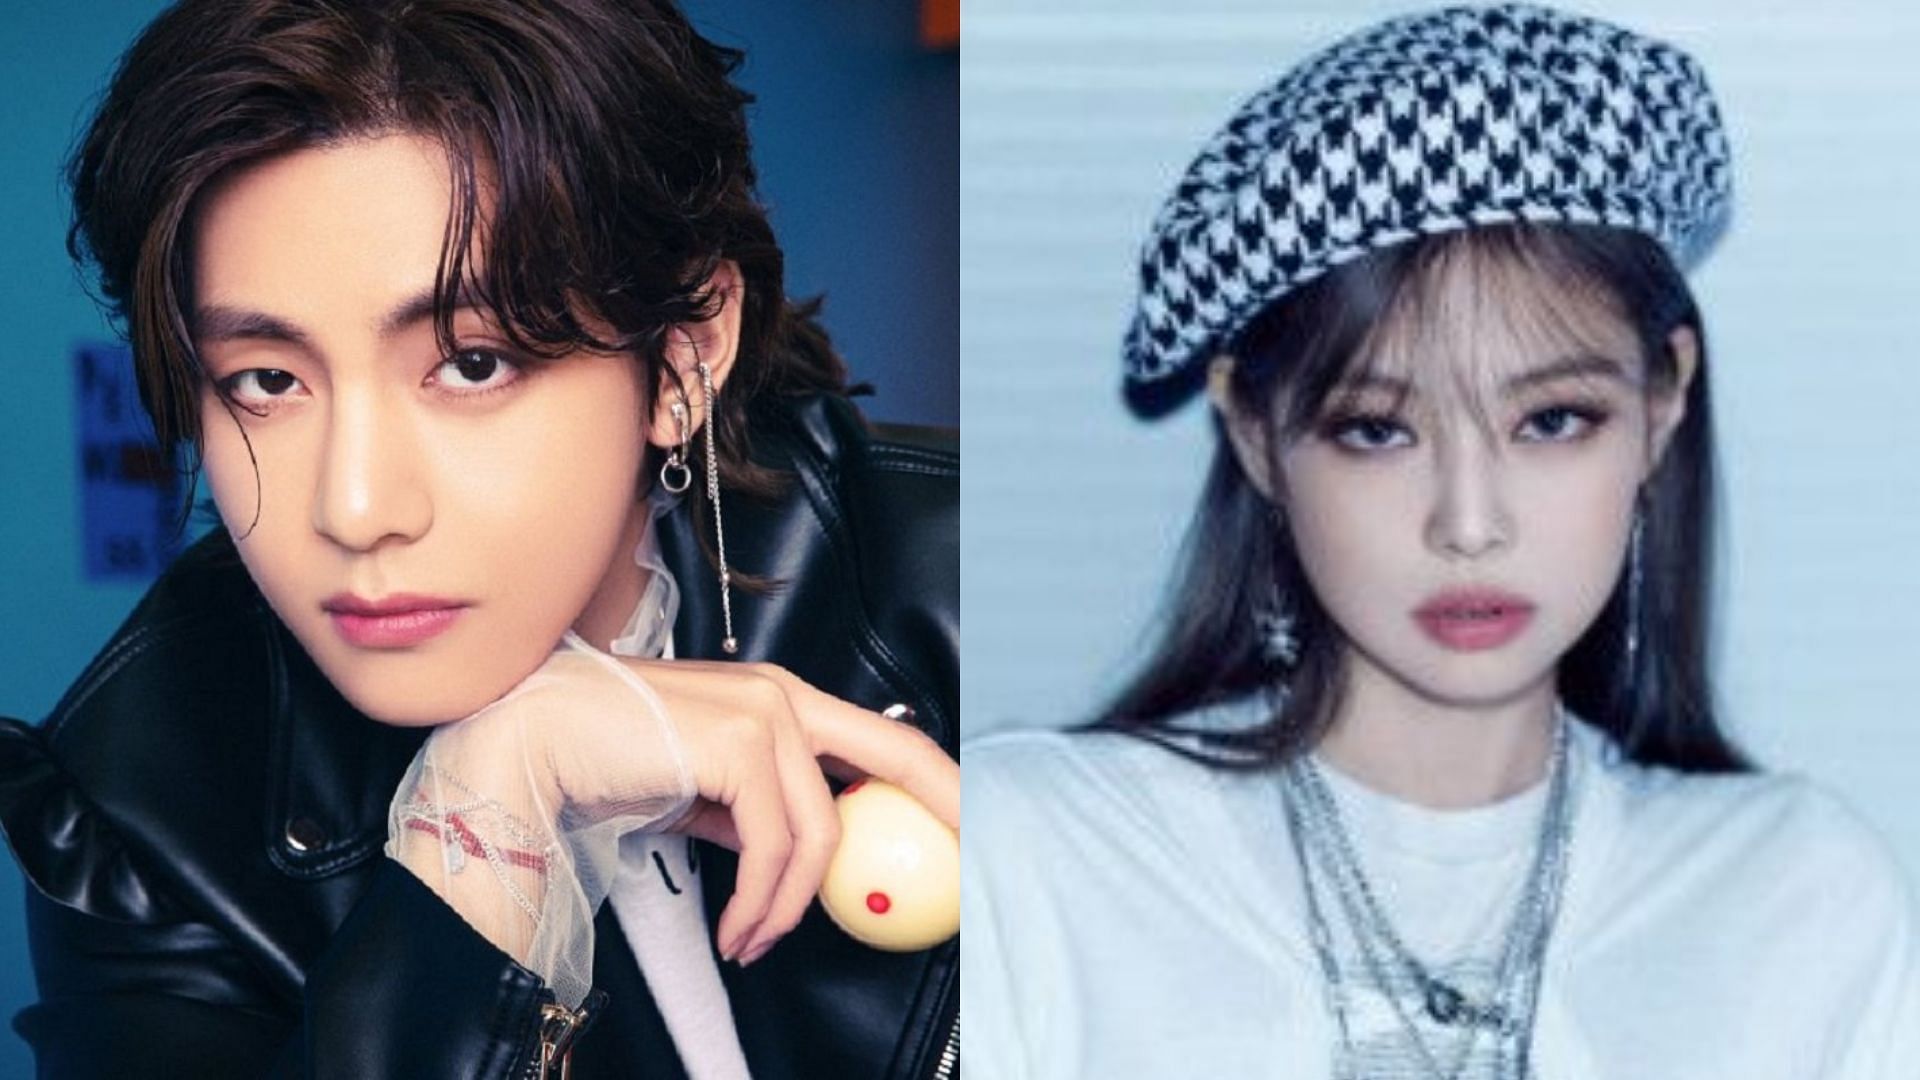 BTS&#039; V and BLACKPINK Jennie&#039;s leaked pictures are fake (Image via YG Entertainment and BIG HIT MUSIC)